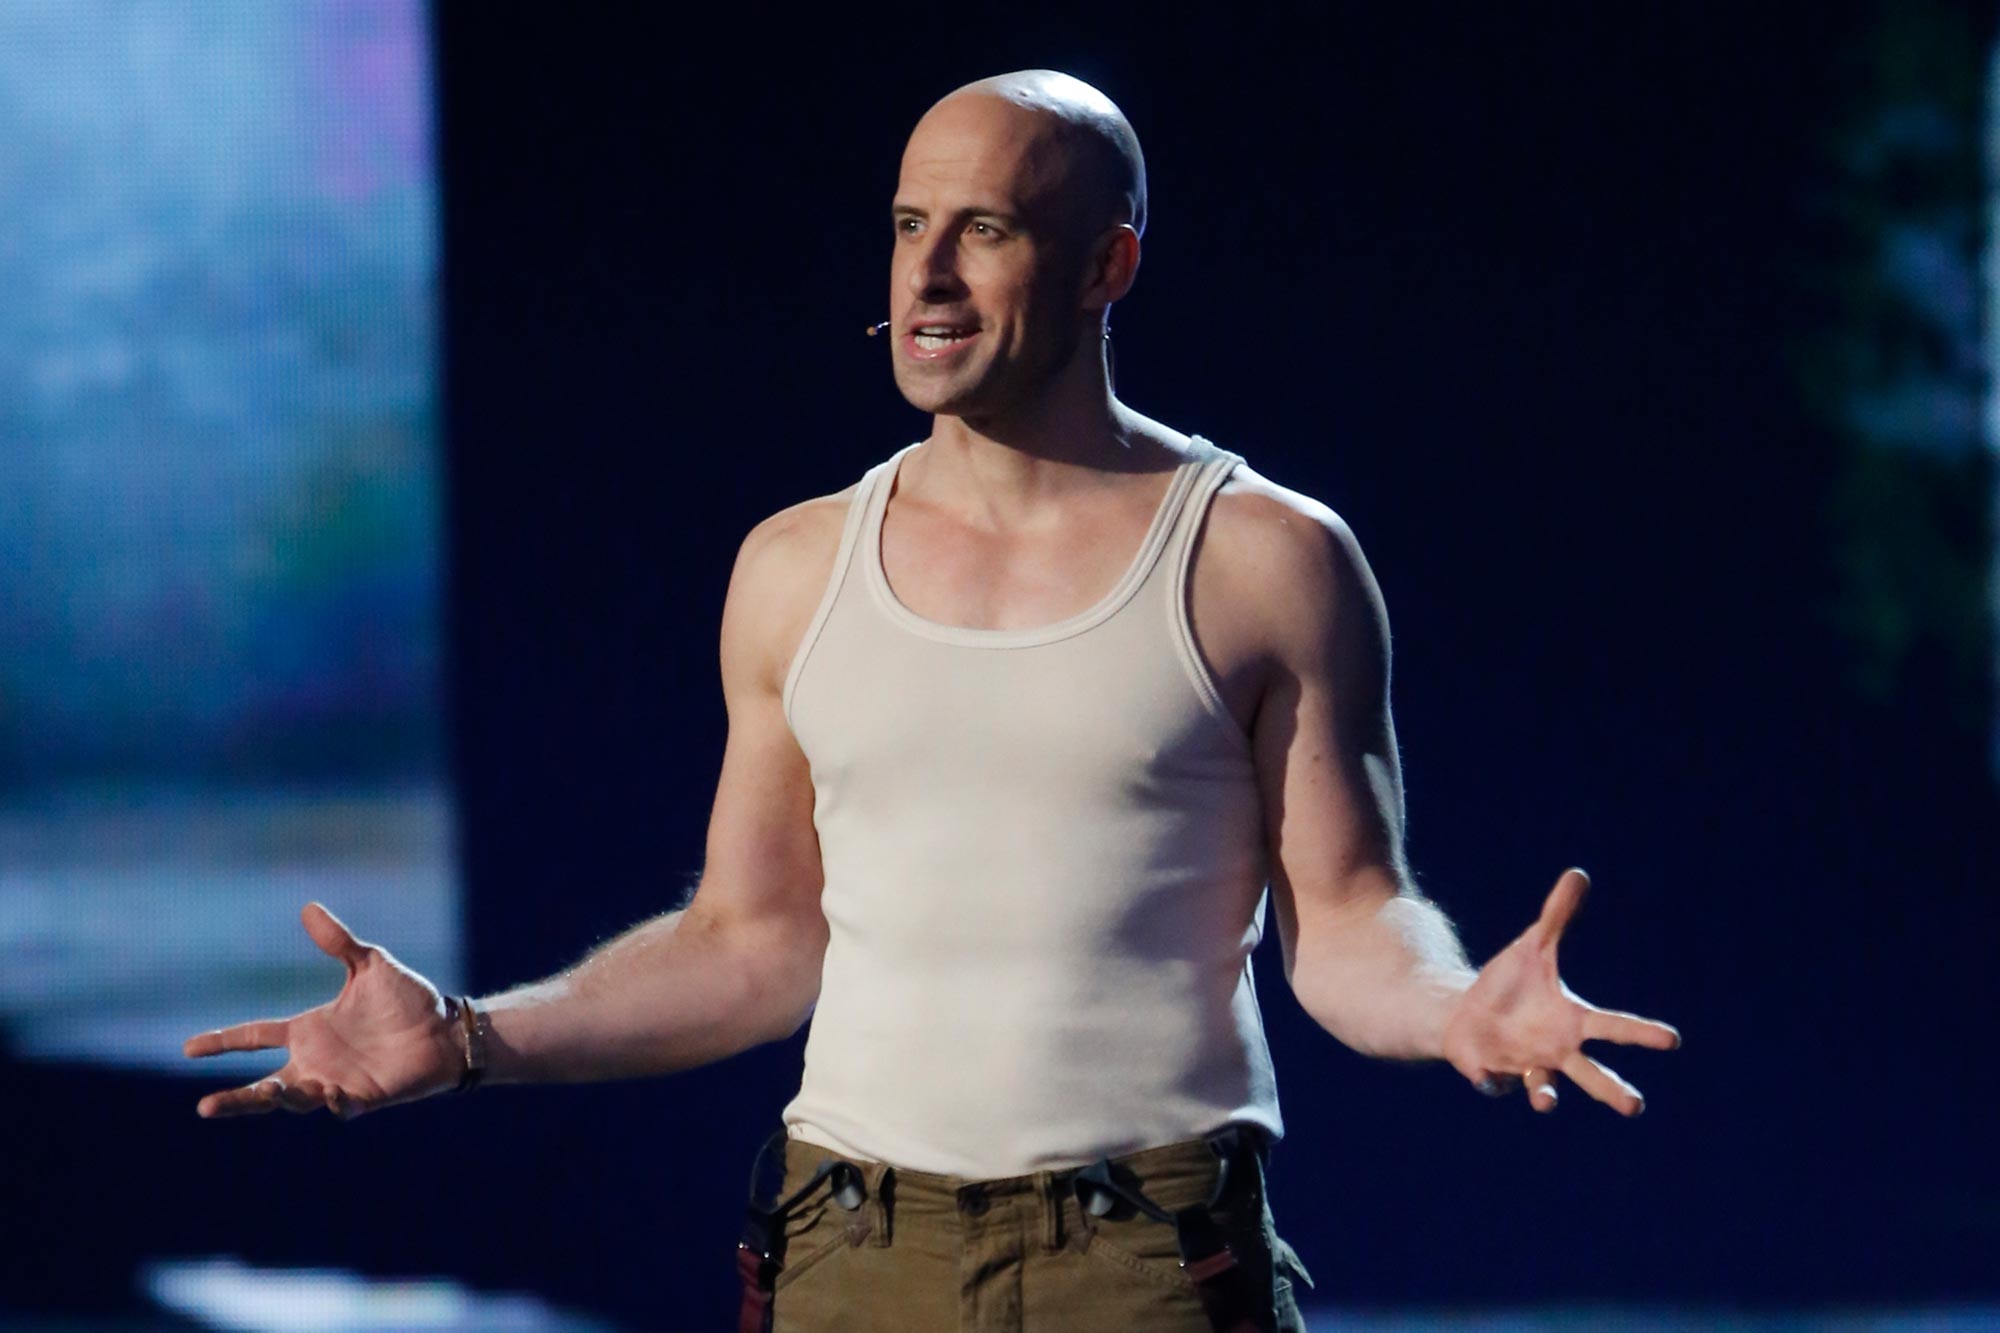 agt-extreme-stunt-gone-wrong-jonathan-goodwin-sues-nbc-over-negligence